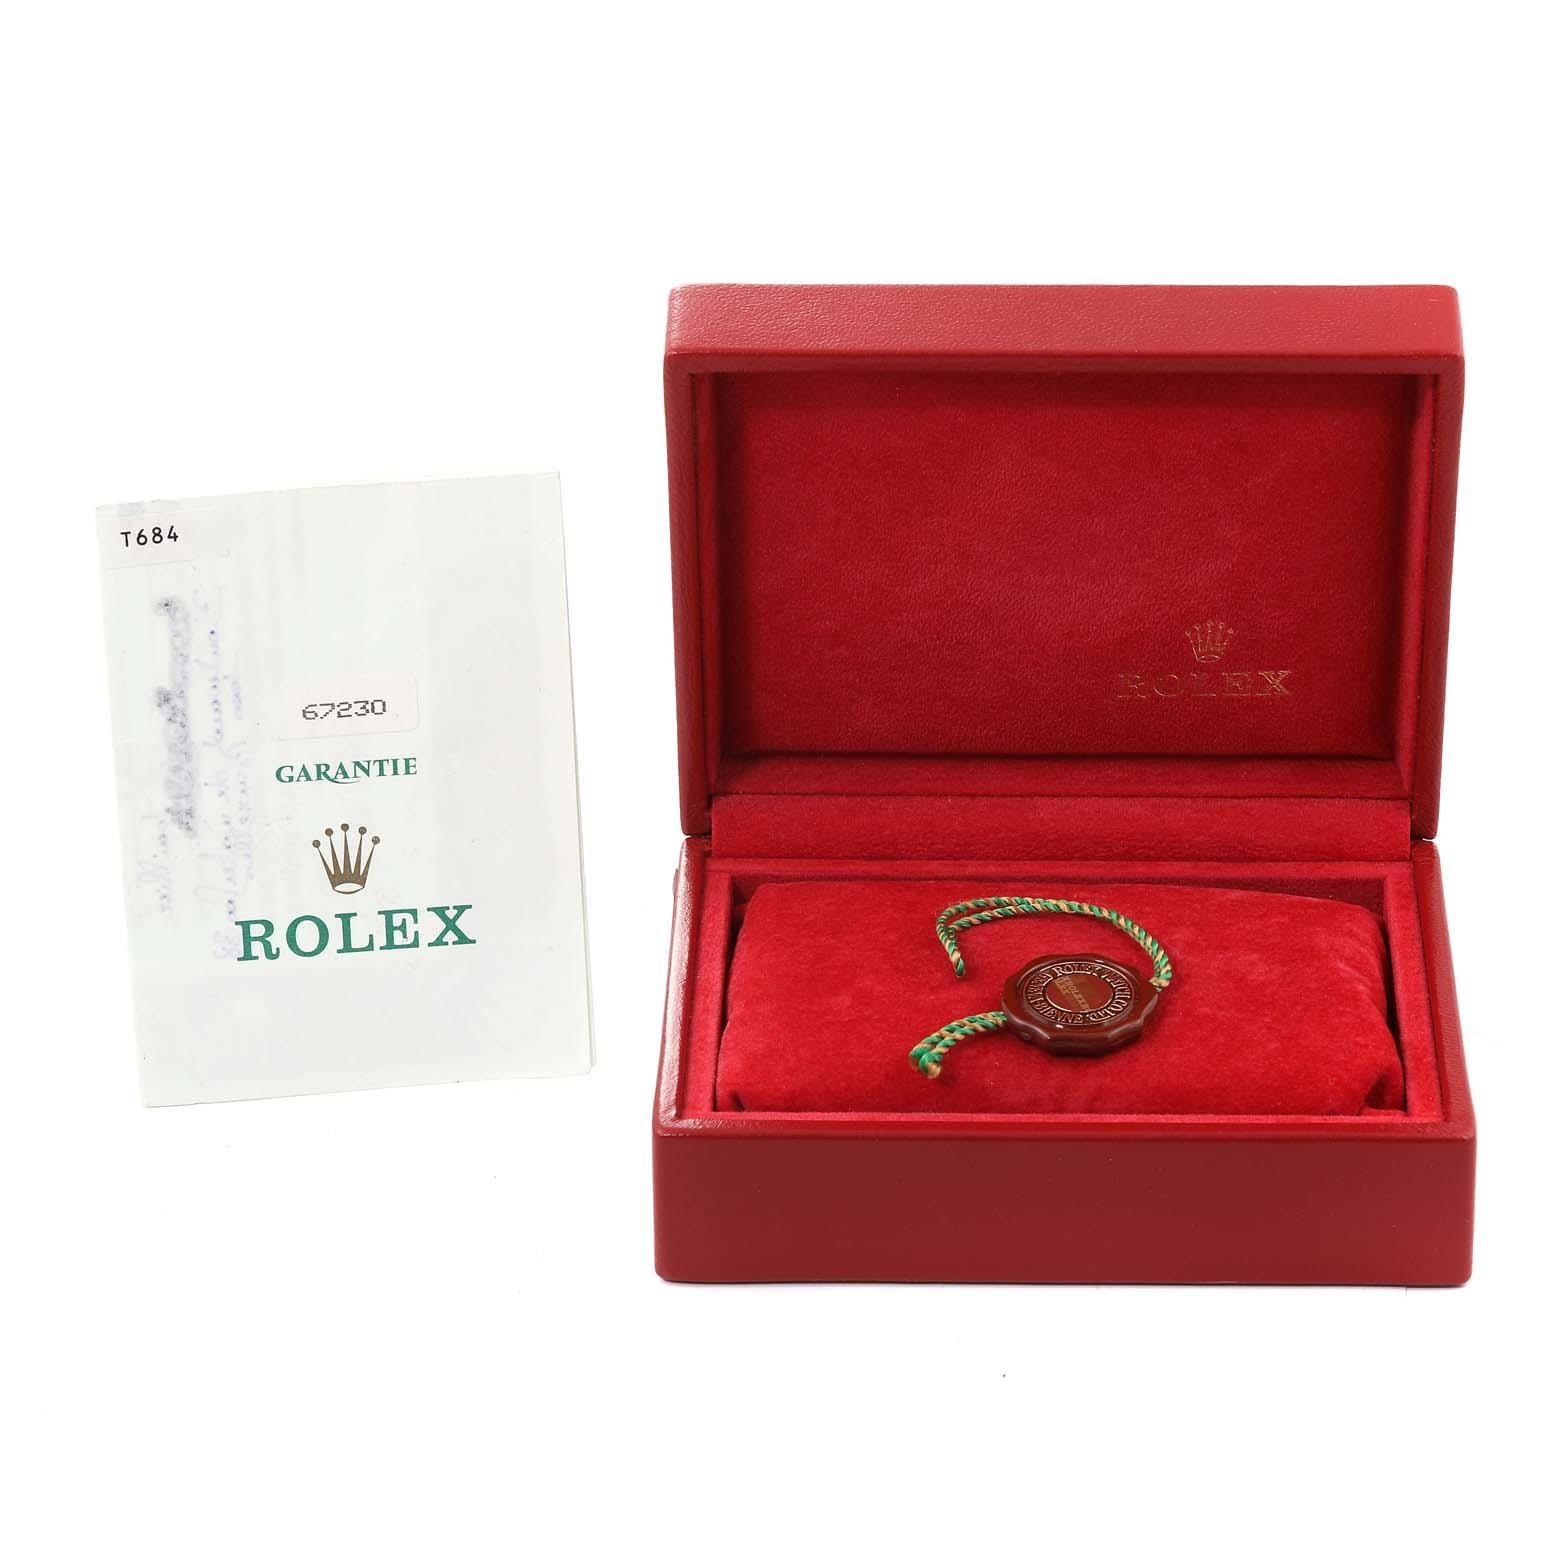 Rolex Oyster Perpetual Salmon Dial Oyster Bracelet Ladies Watch 67230 Box Papers 8